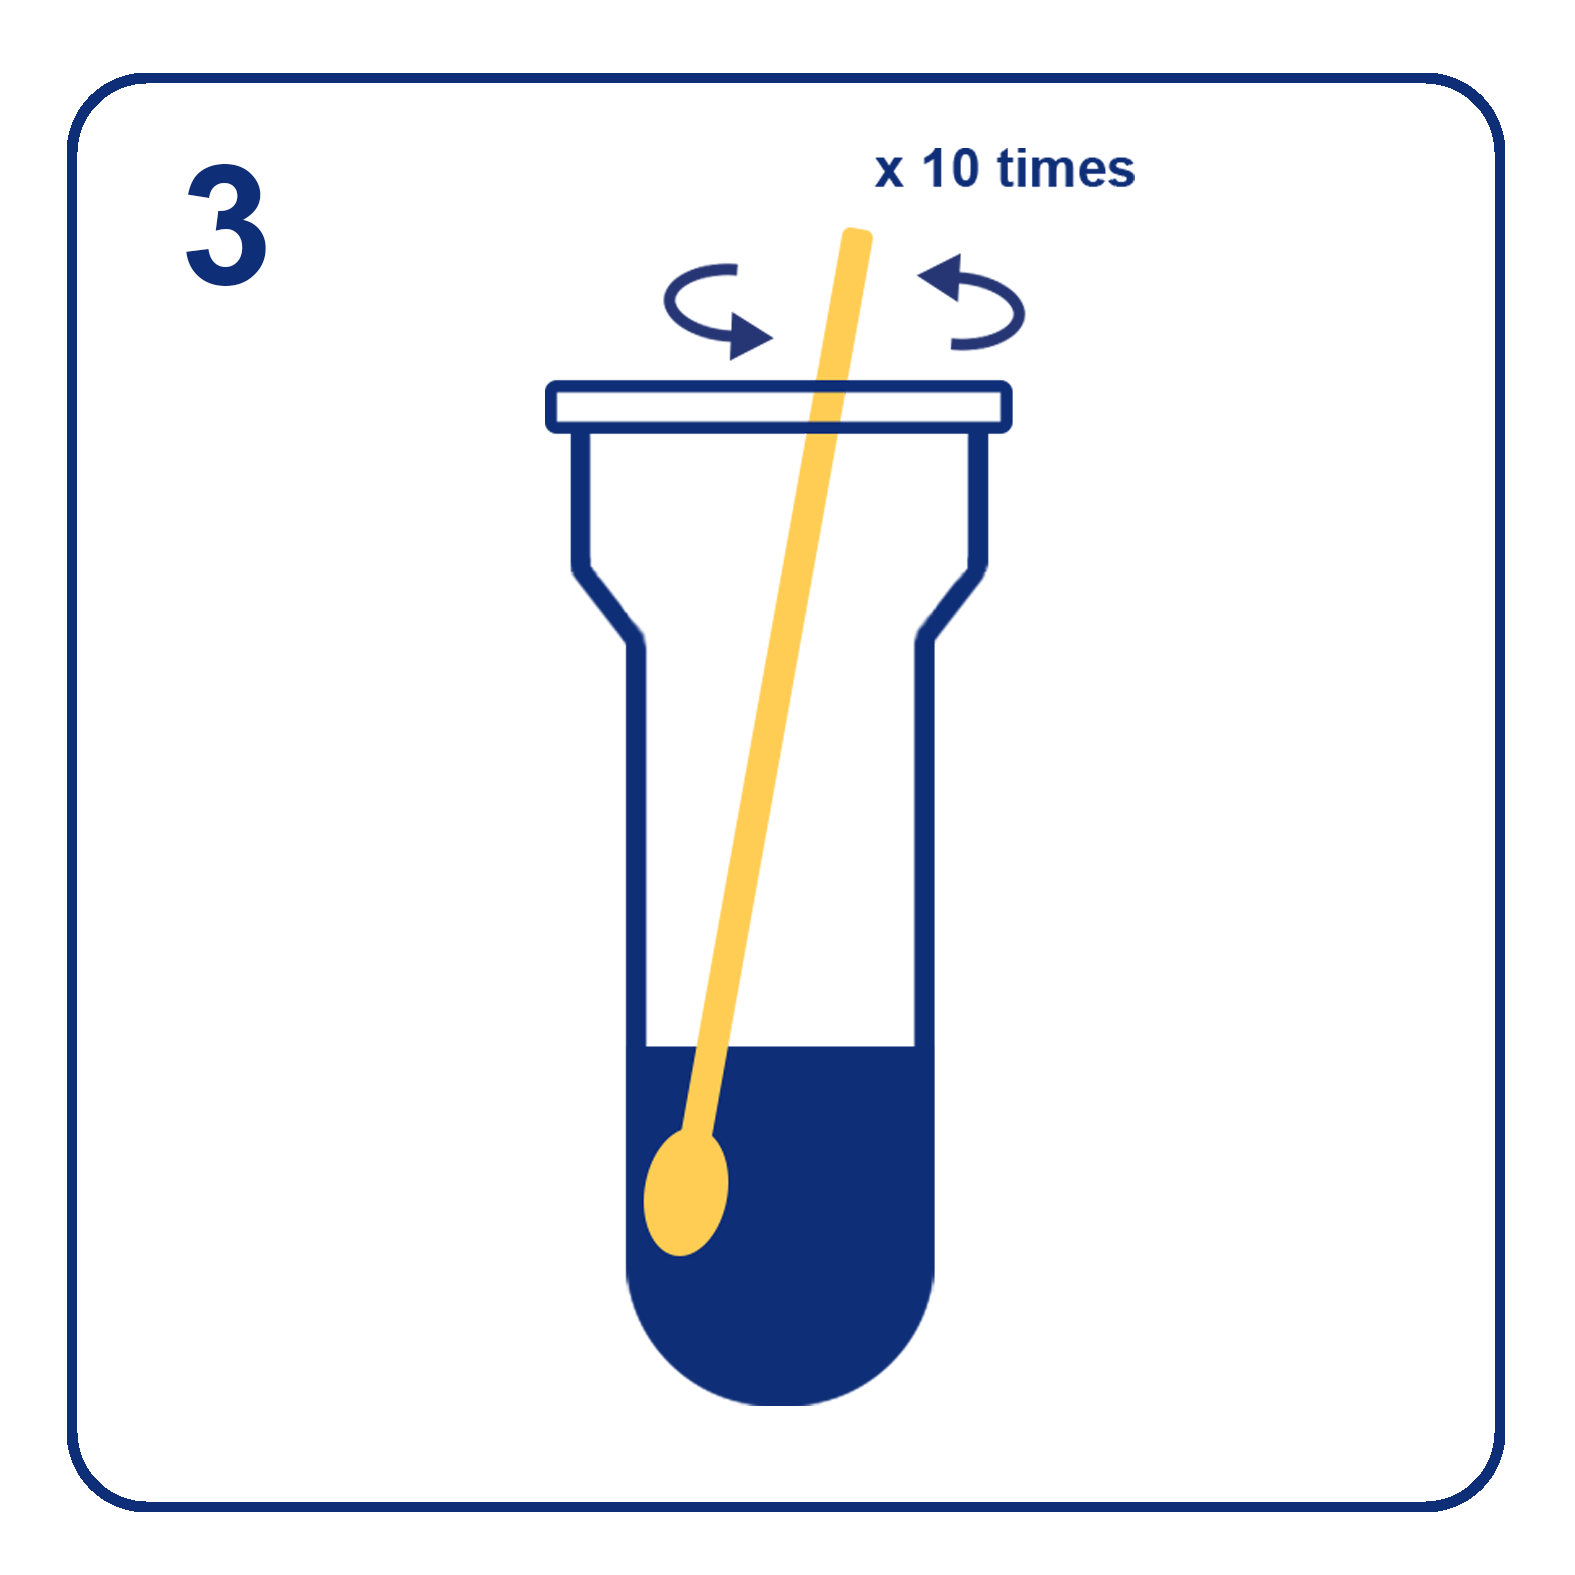 Place the swab in the extraction buffer tube and rotate 10 times, squeezing against the tube walls to extract the most sample.